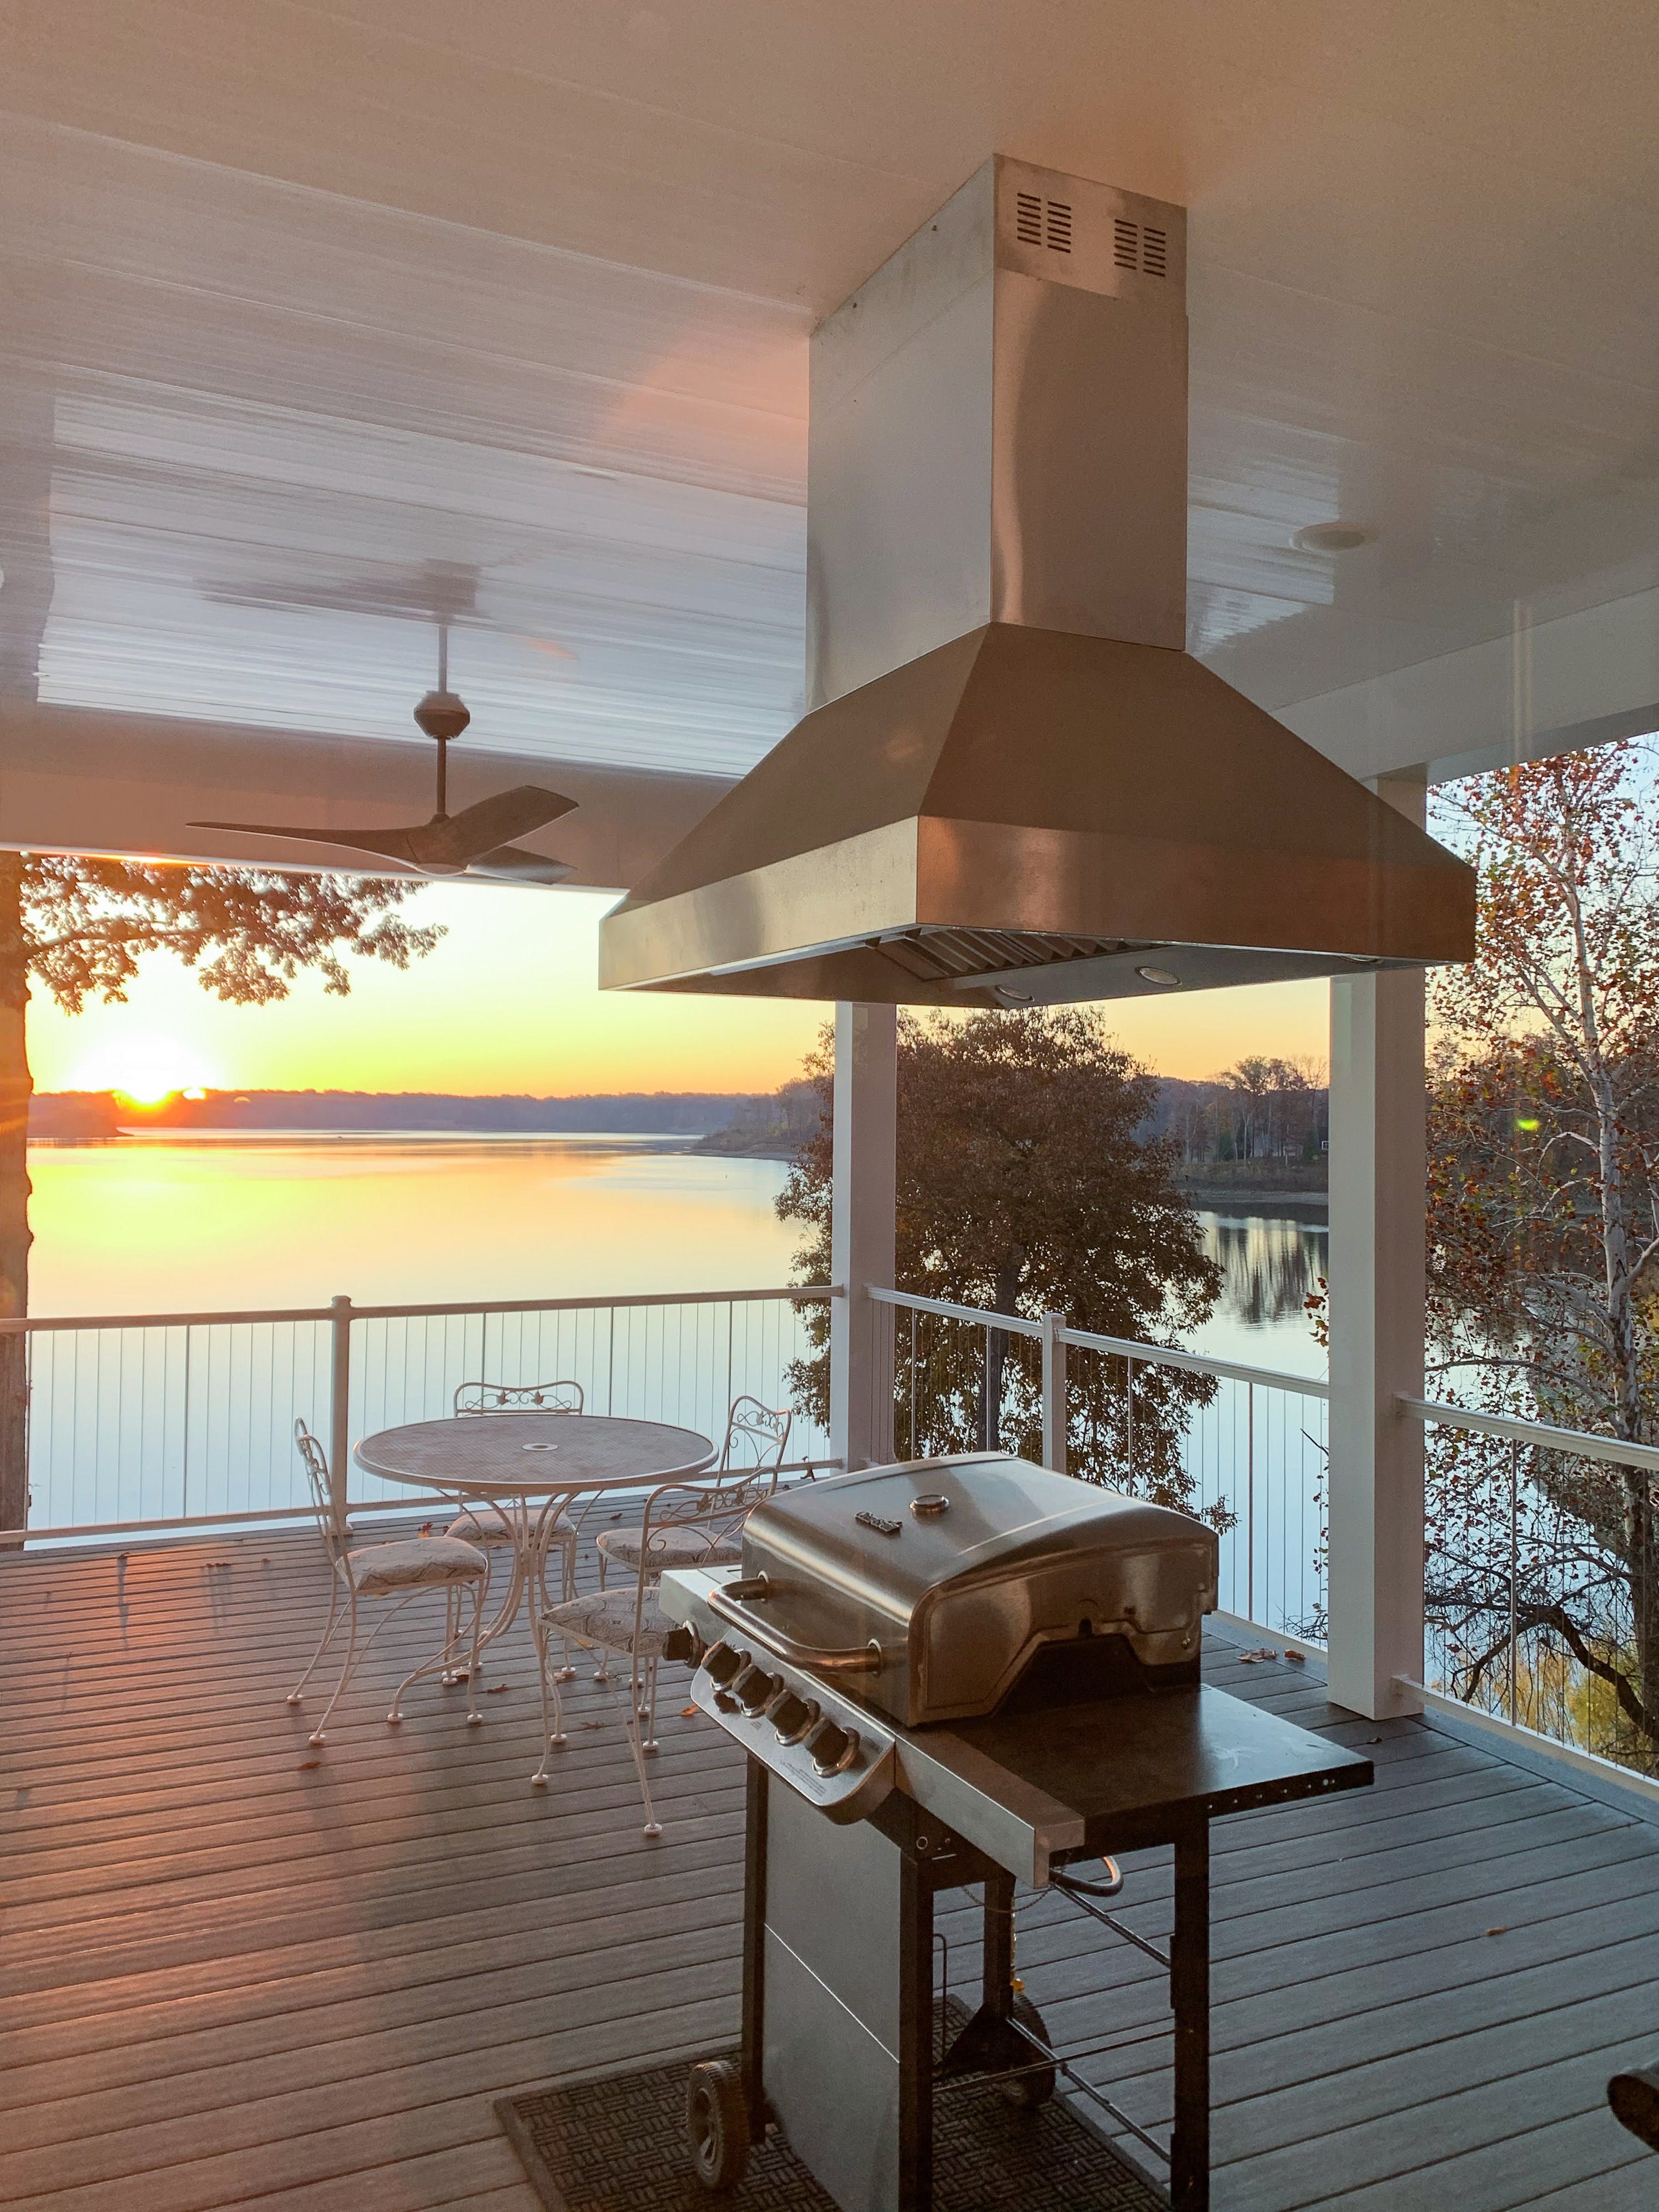 beautiful proline outdoor range hood over a grill at sunset